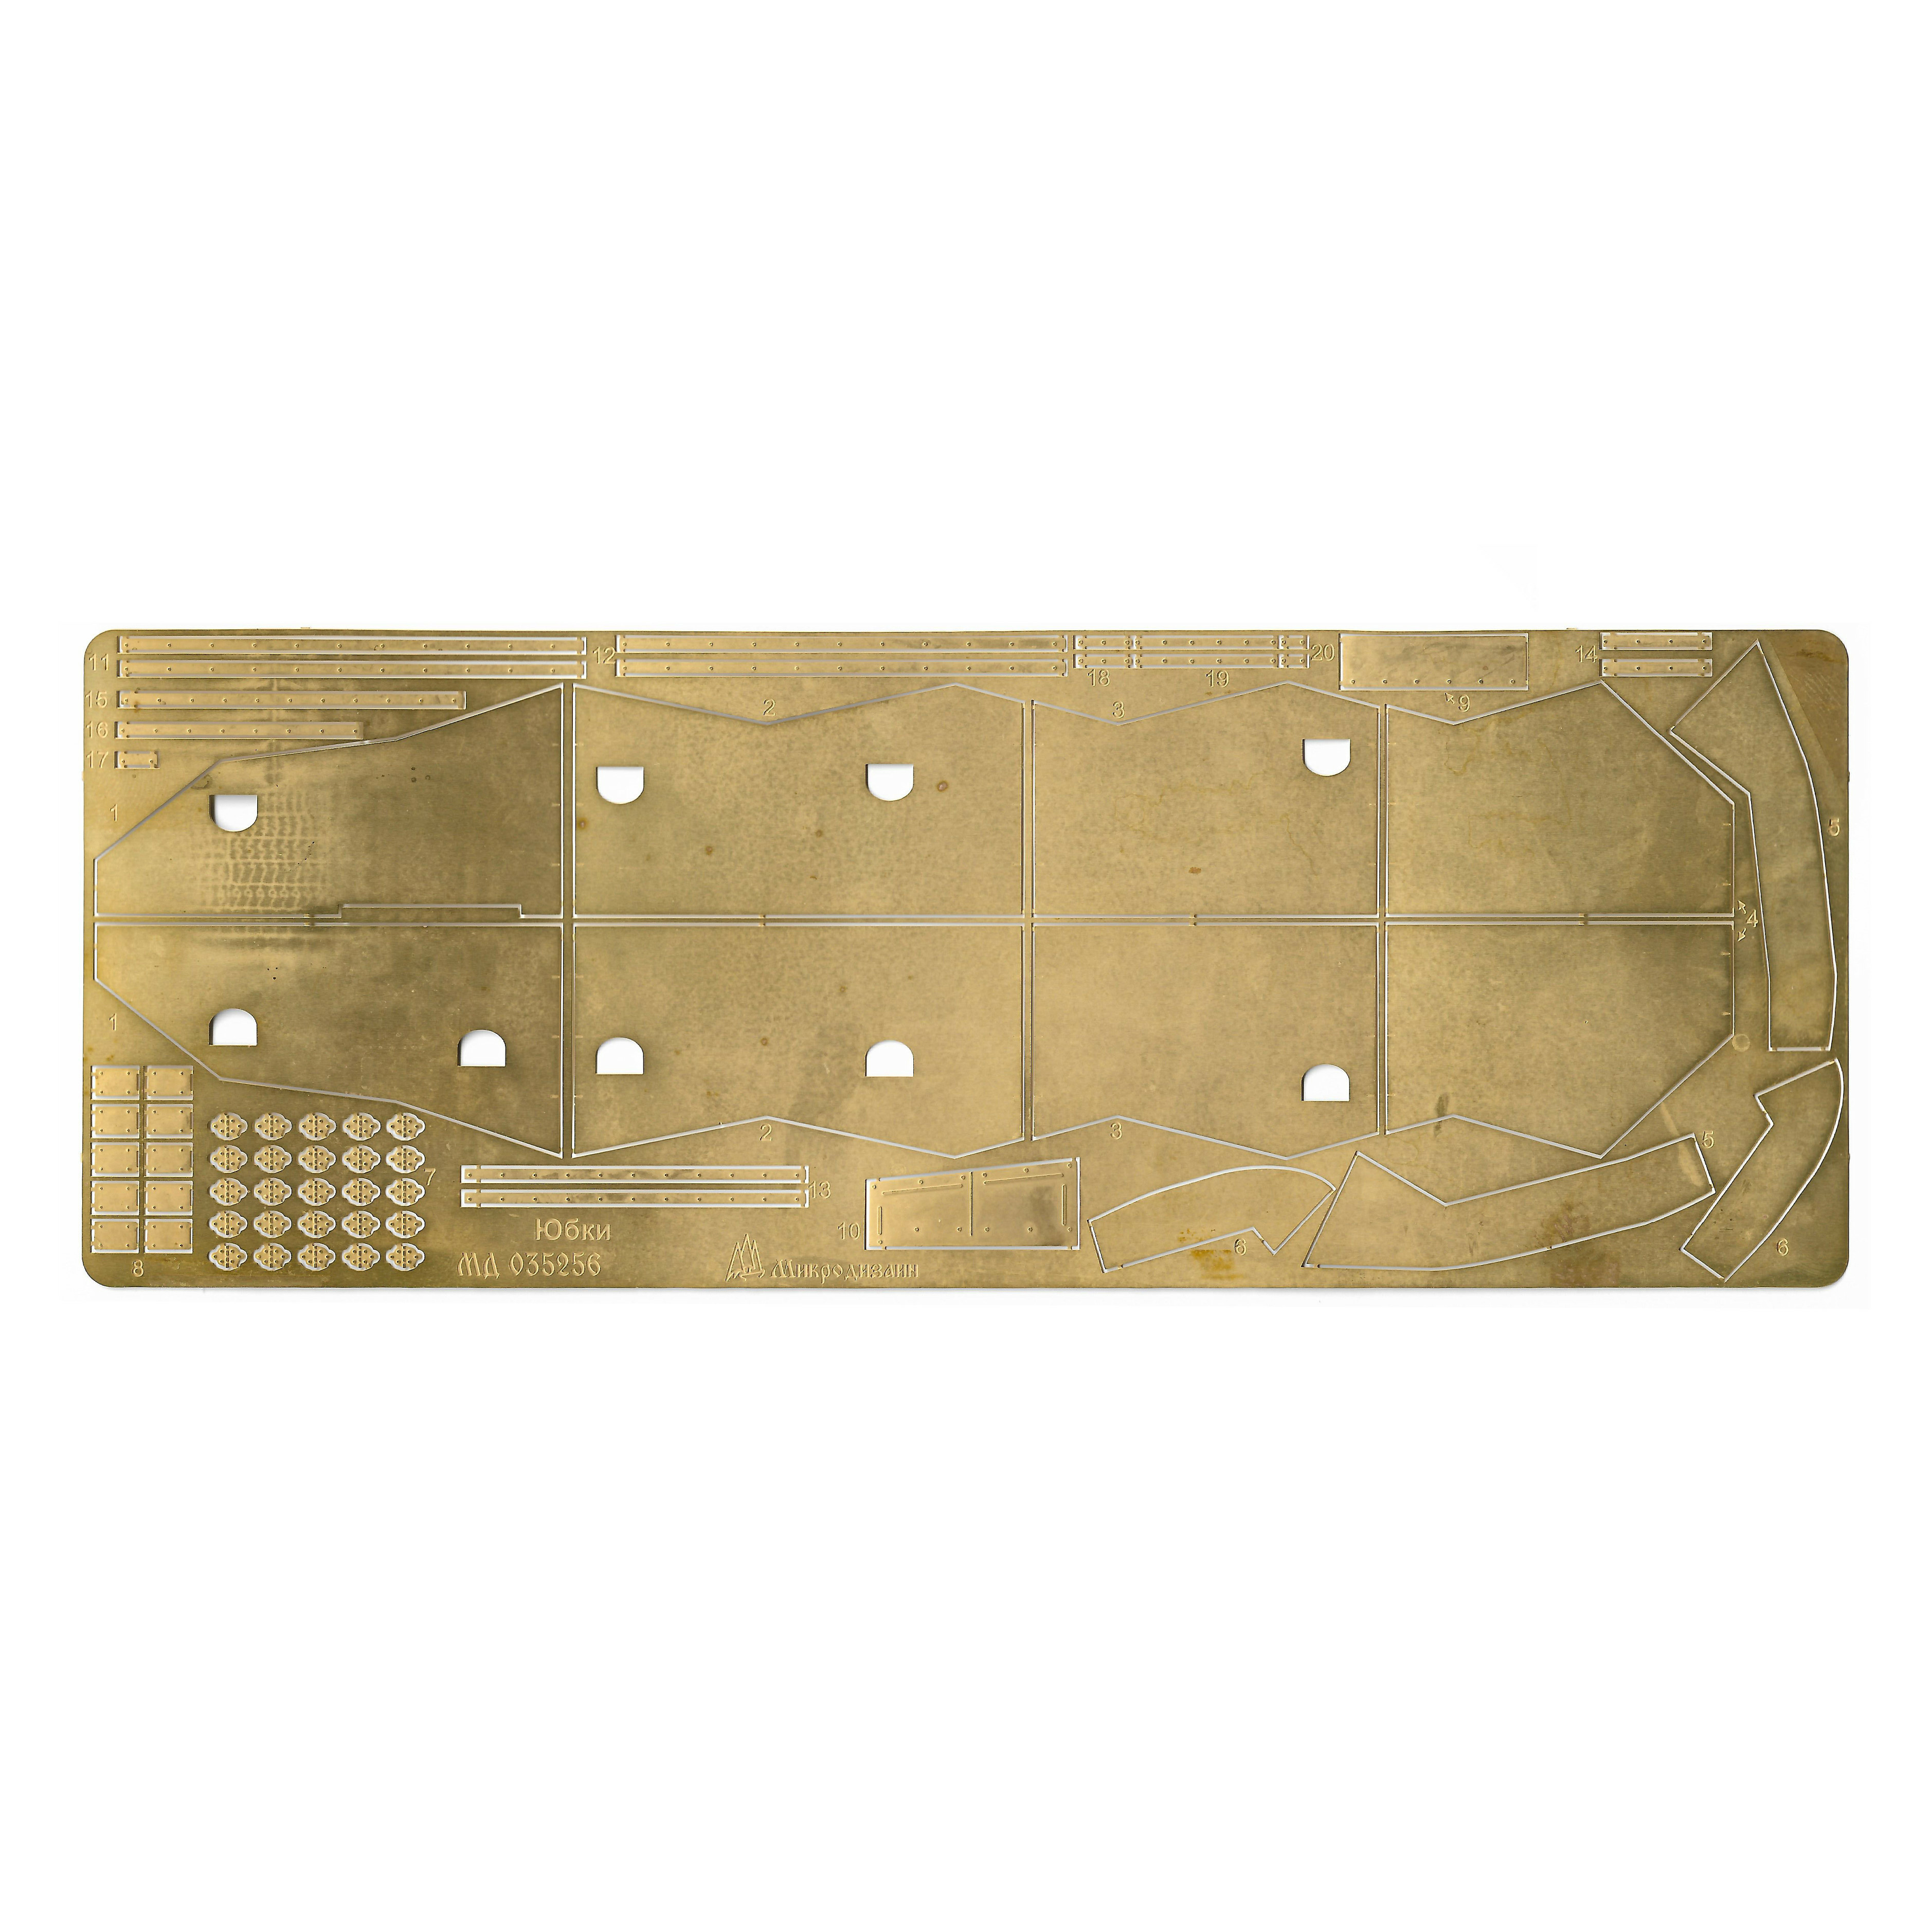 035256 Microdesign 1/35 Photo-etching of zigzag screens for the 2C19 152 mm self-propelled divisional howitzer (Zvezda)